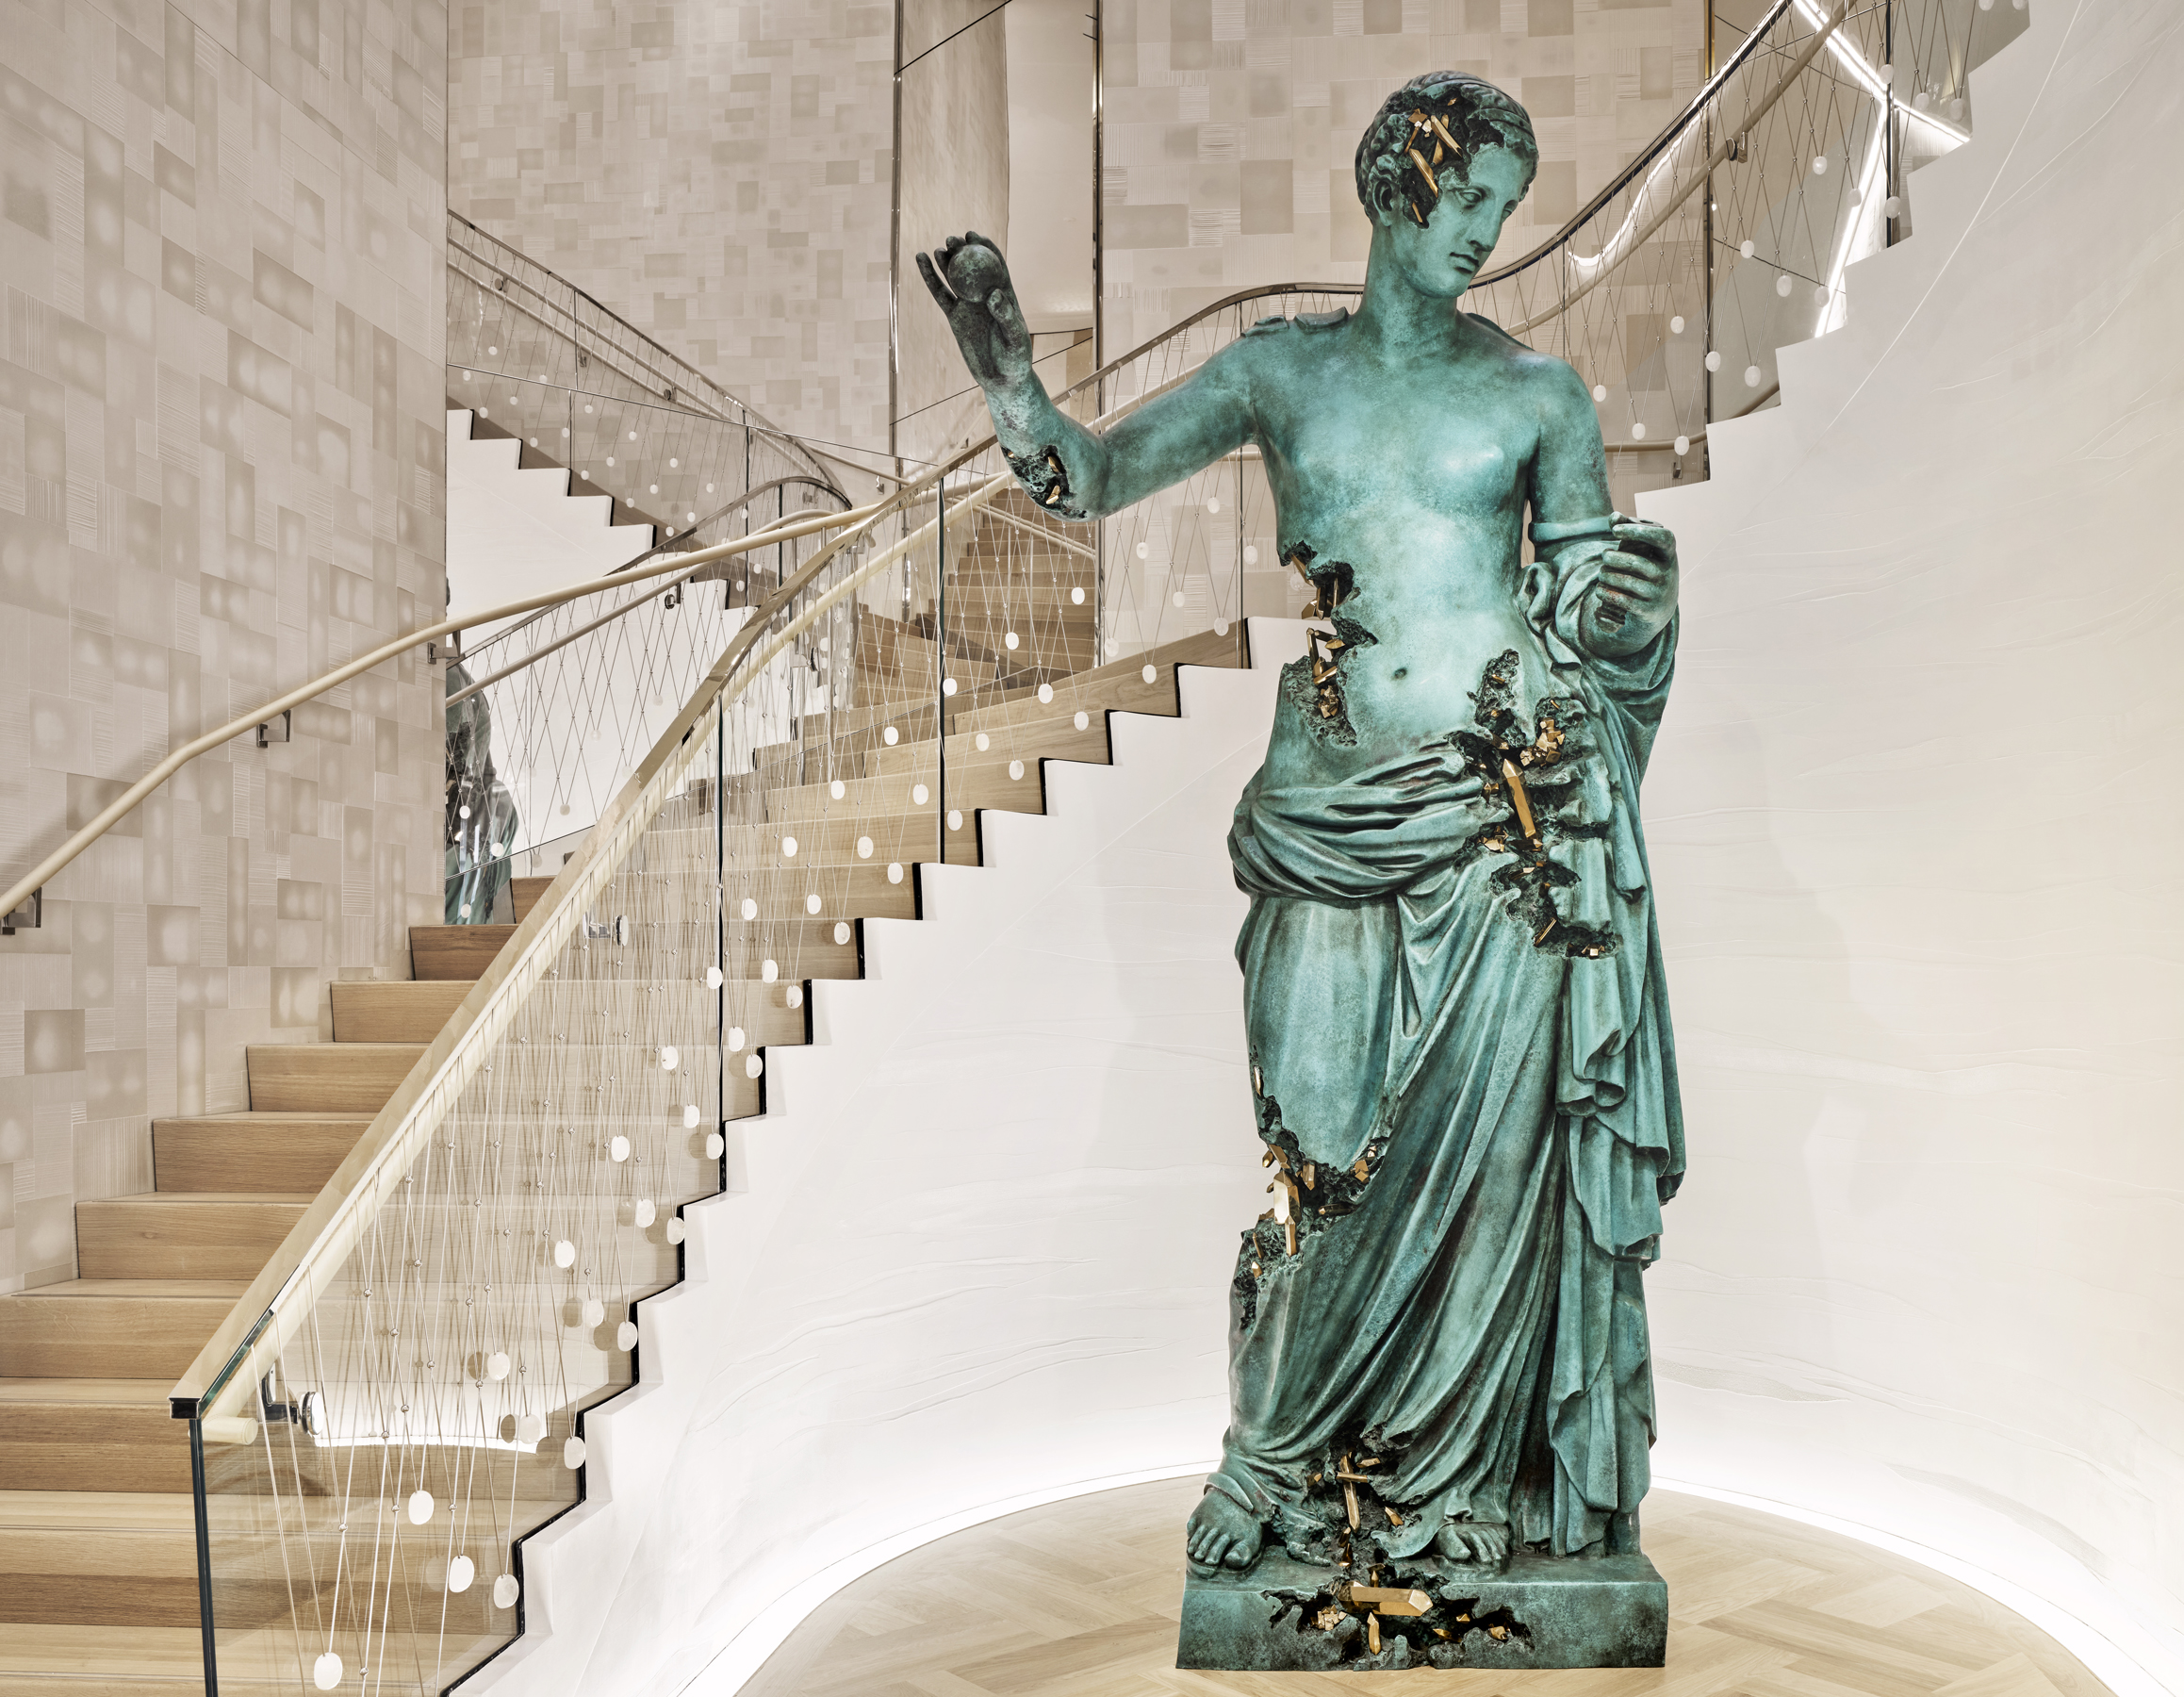 Tiffany's ﻿New York Flagship Receives a ﻿Lustrous Reinvention